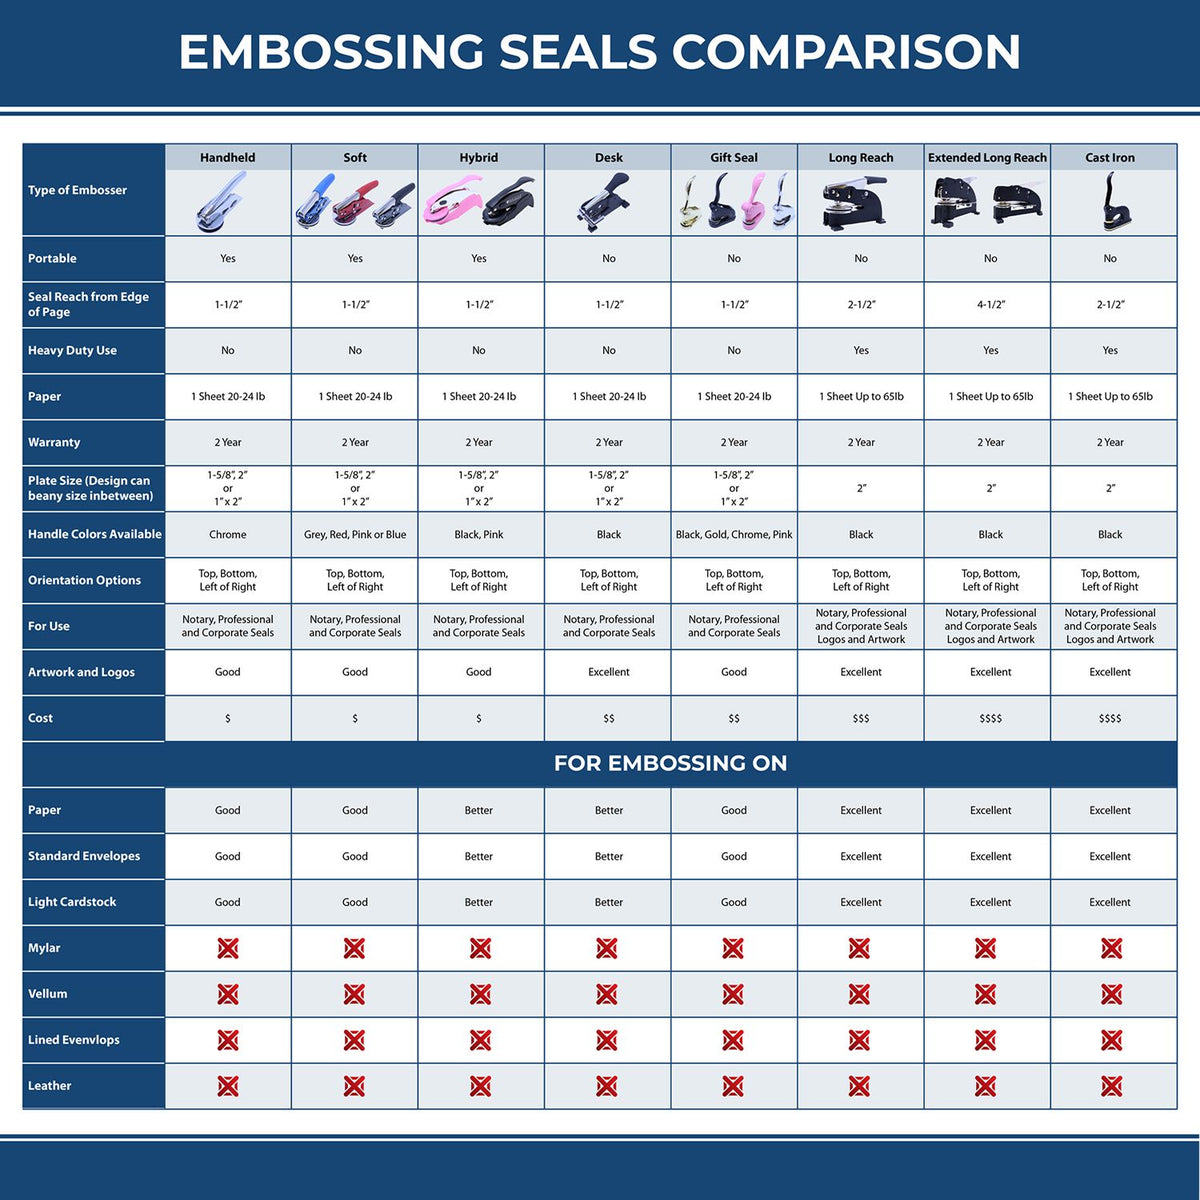 A comparison chart for the different types of mount models available for the Extended Long Reach Indiana Architect Seal Embosser.